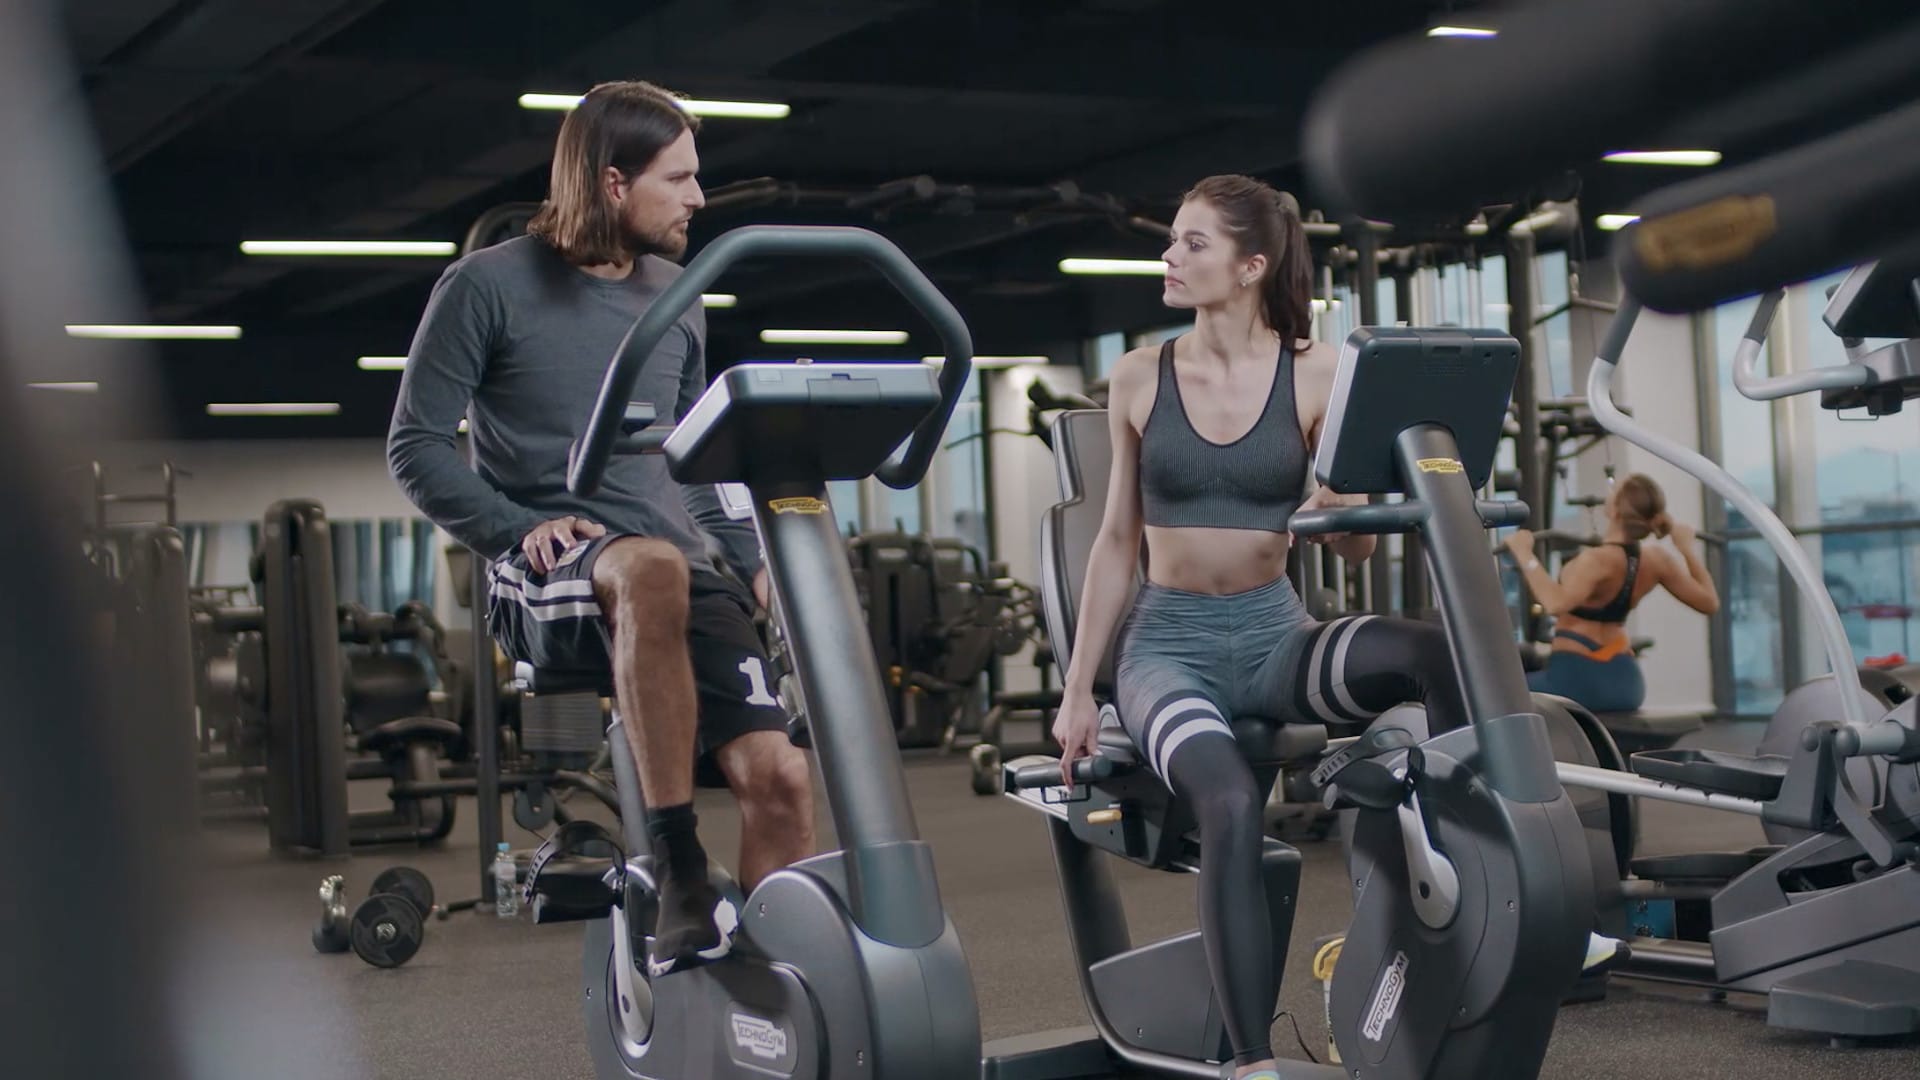 Richard La Ruina and an actress in the gym in Super Seducer 3